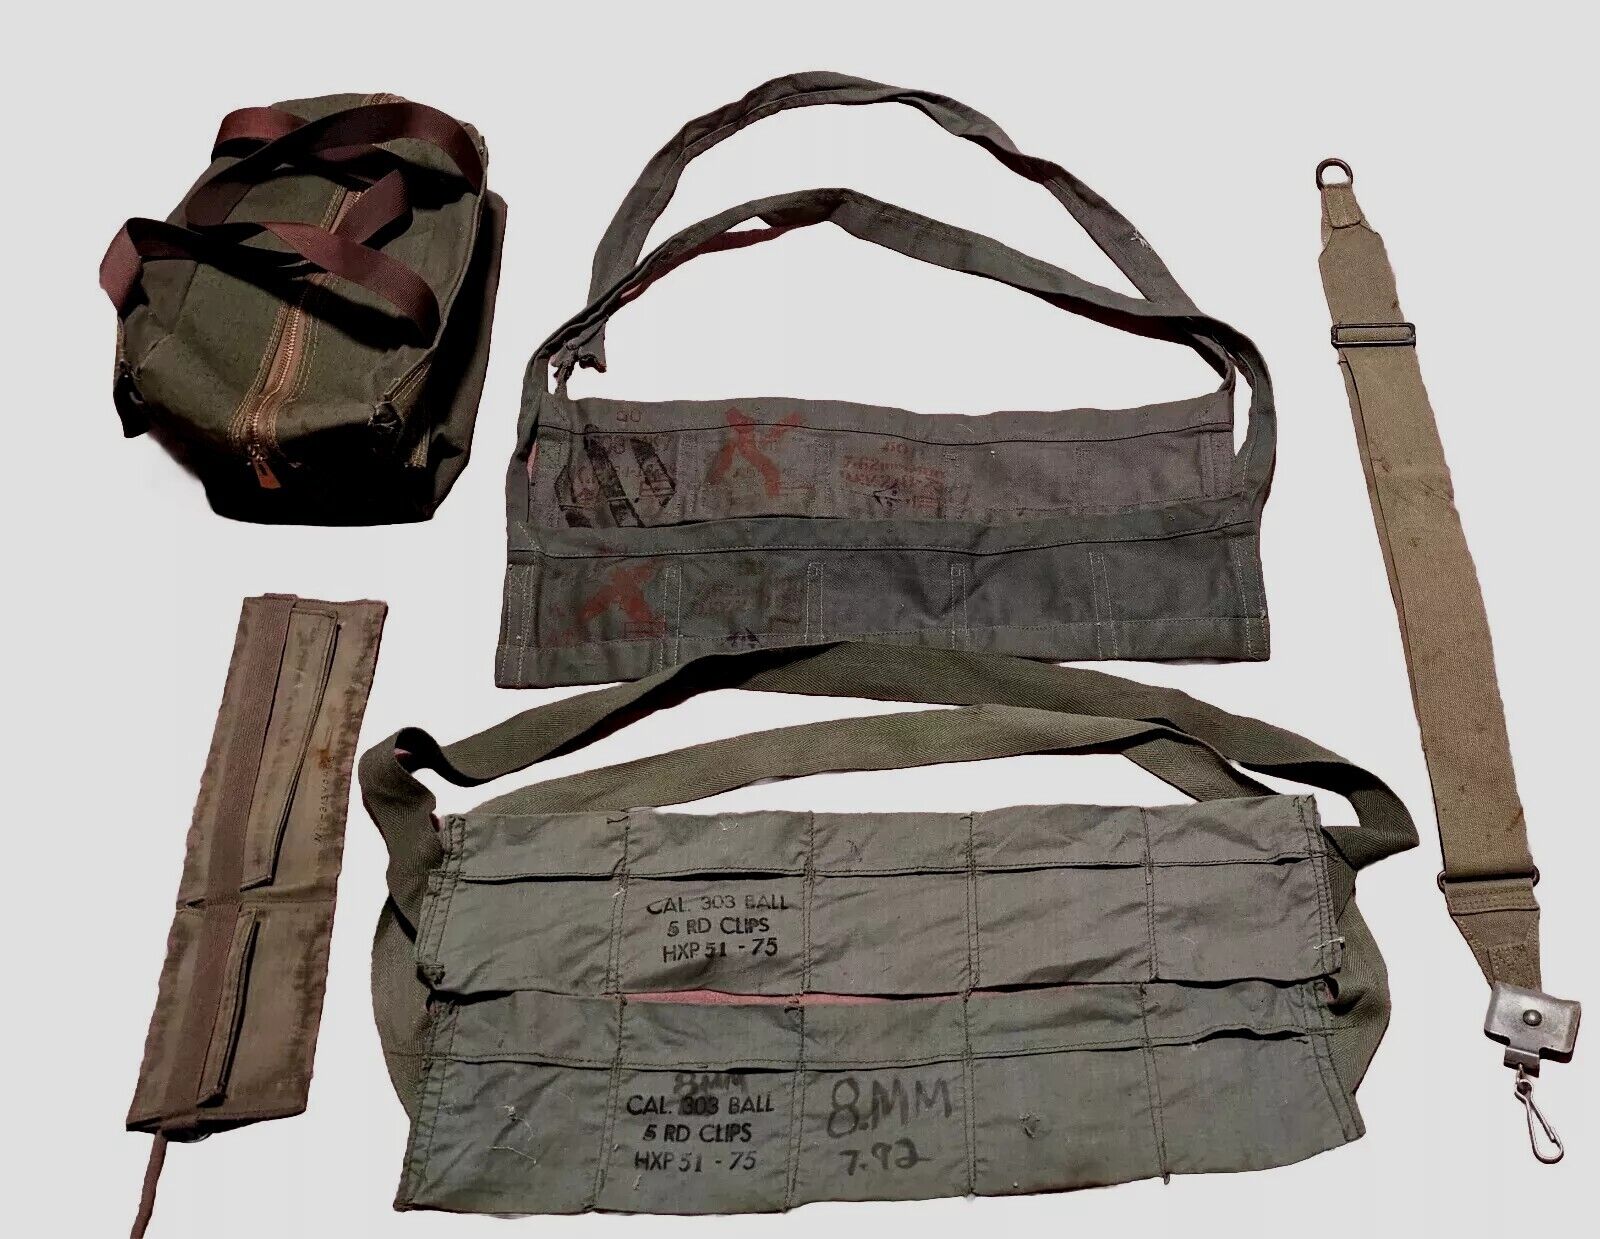 WW2 Era miscellaneous Military Gear Bandoliers Slings And Bags